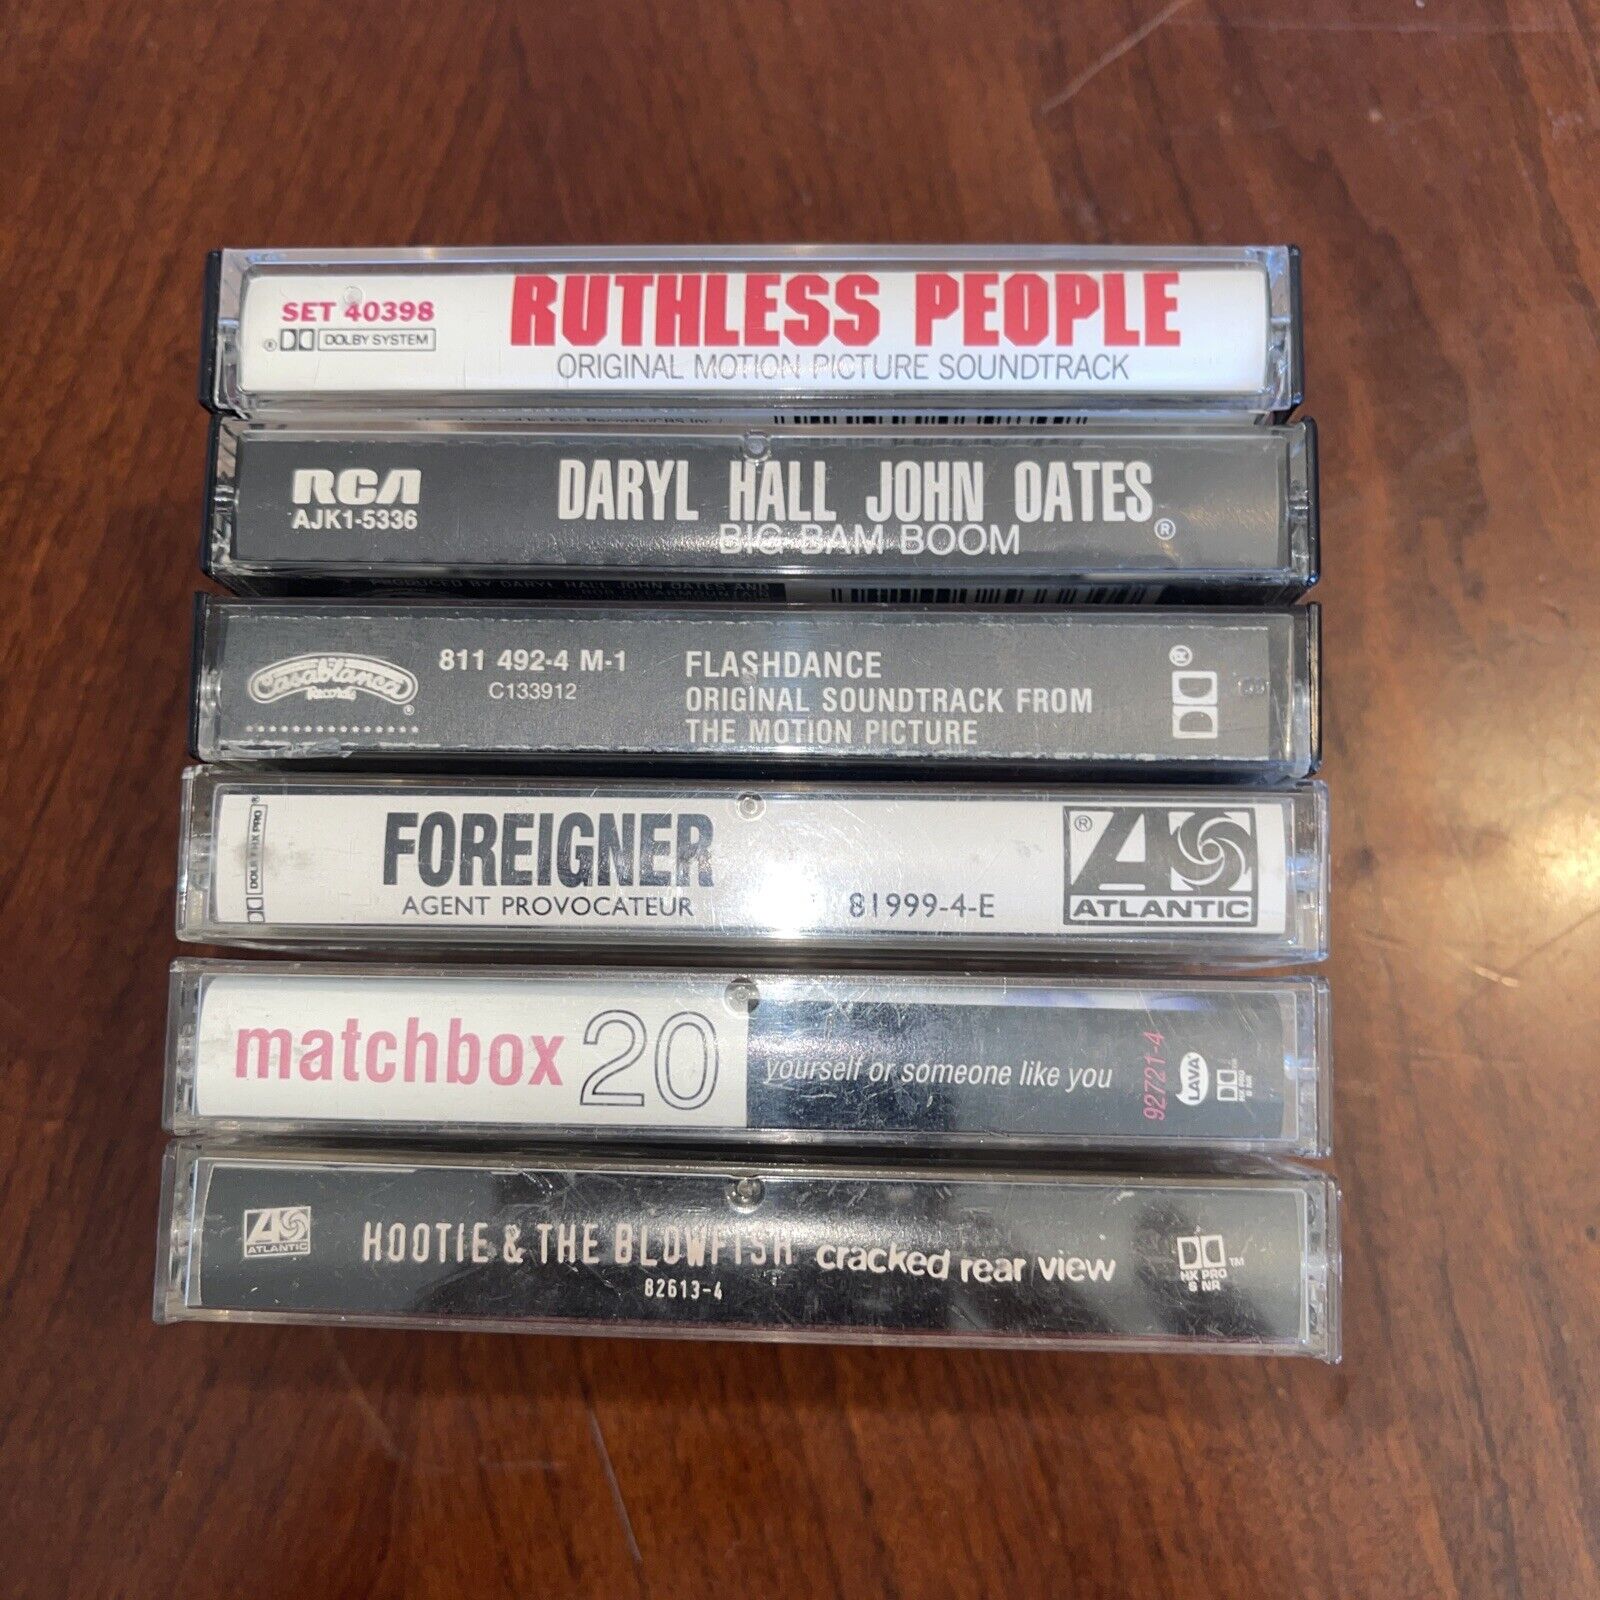 Vintage Cassette Tape Lot of 6 Mixed Cassettes Late 1900’s, Matchbook 20